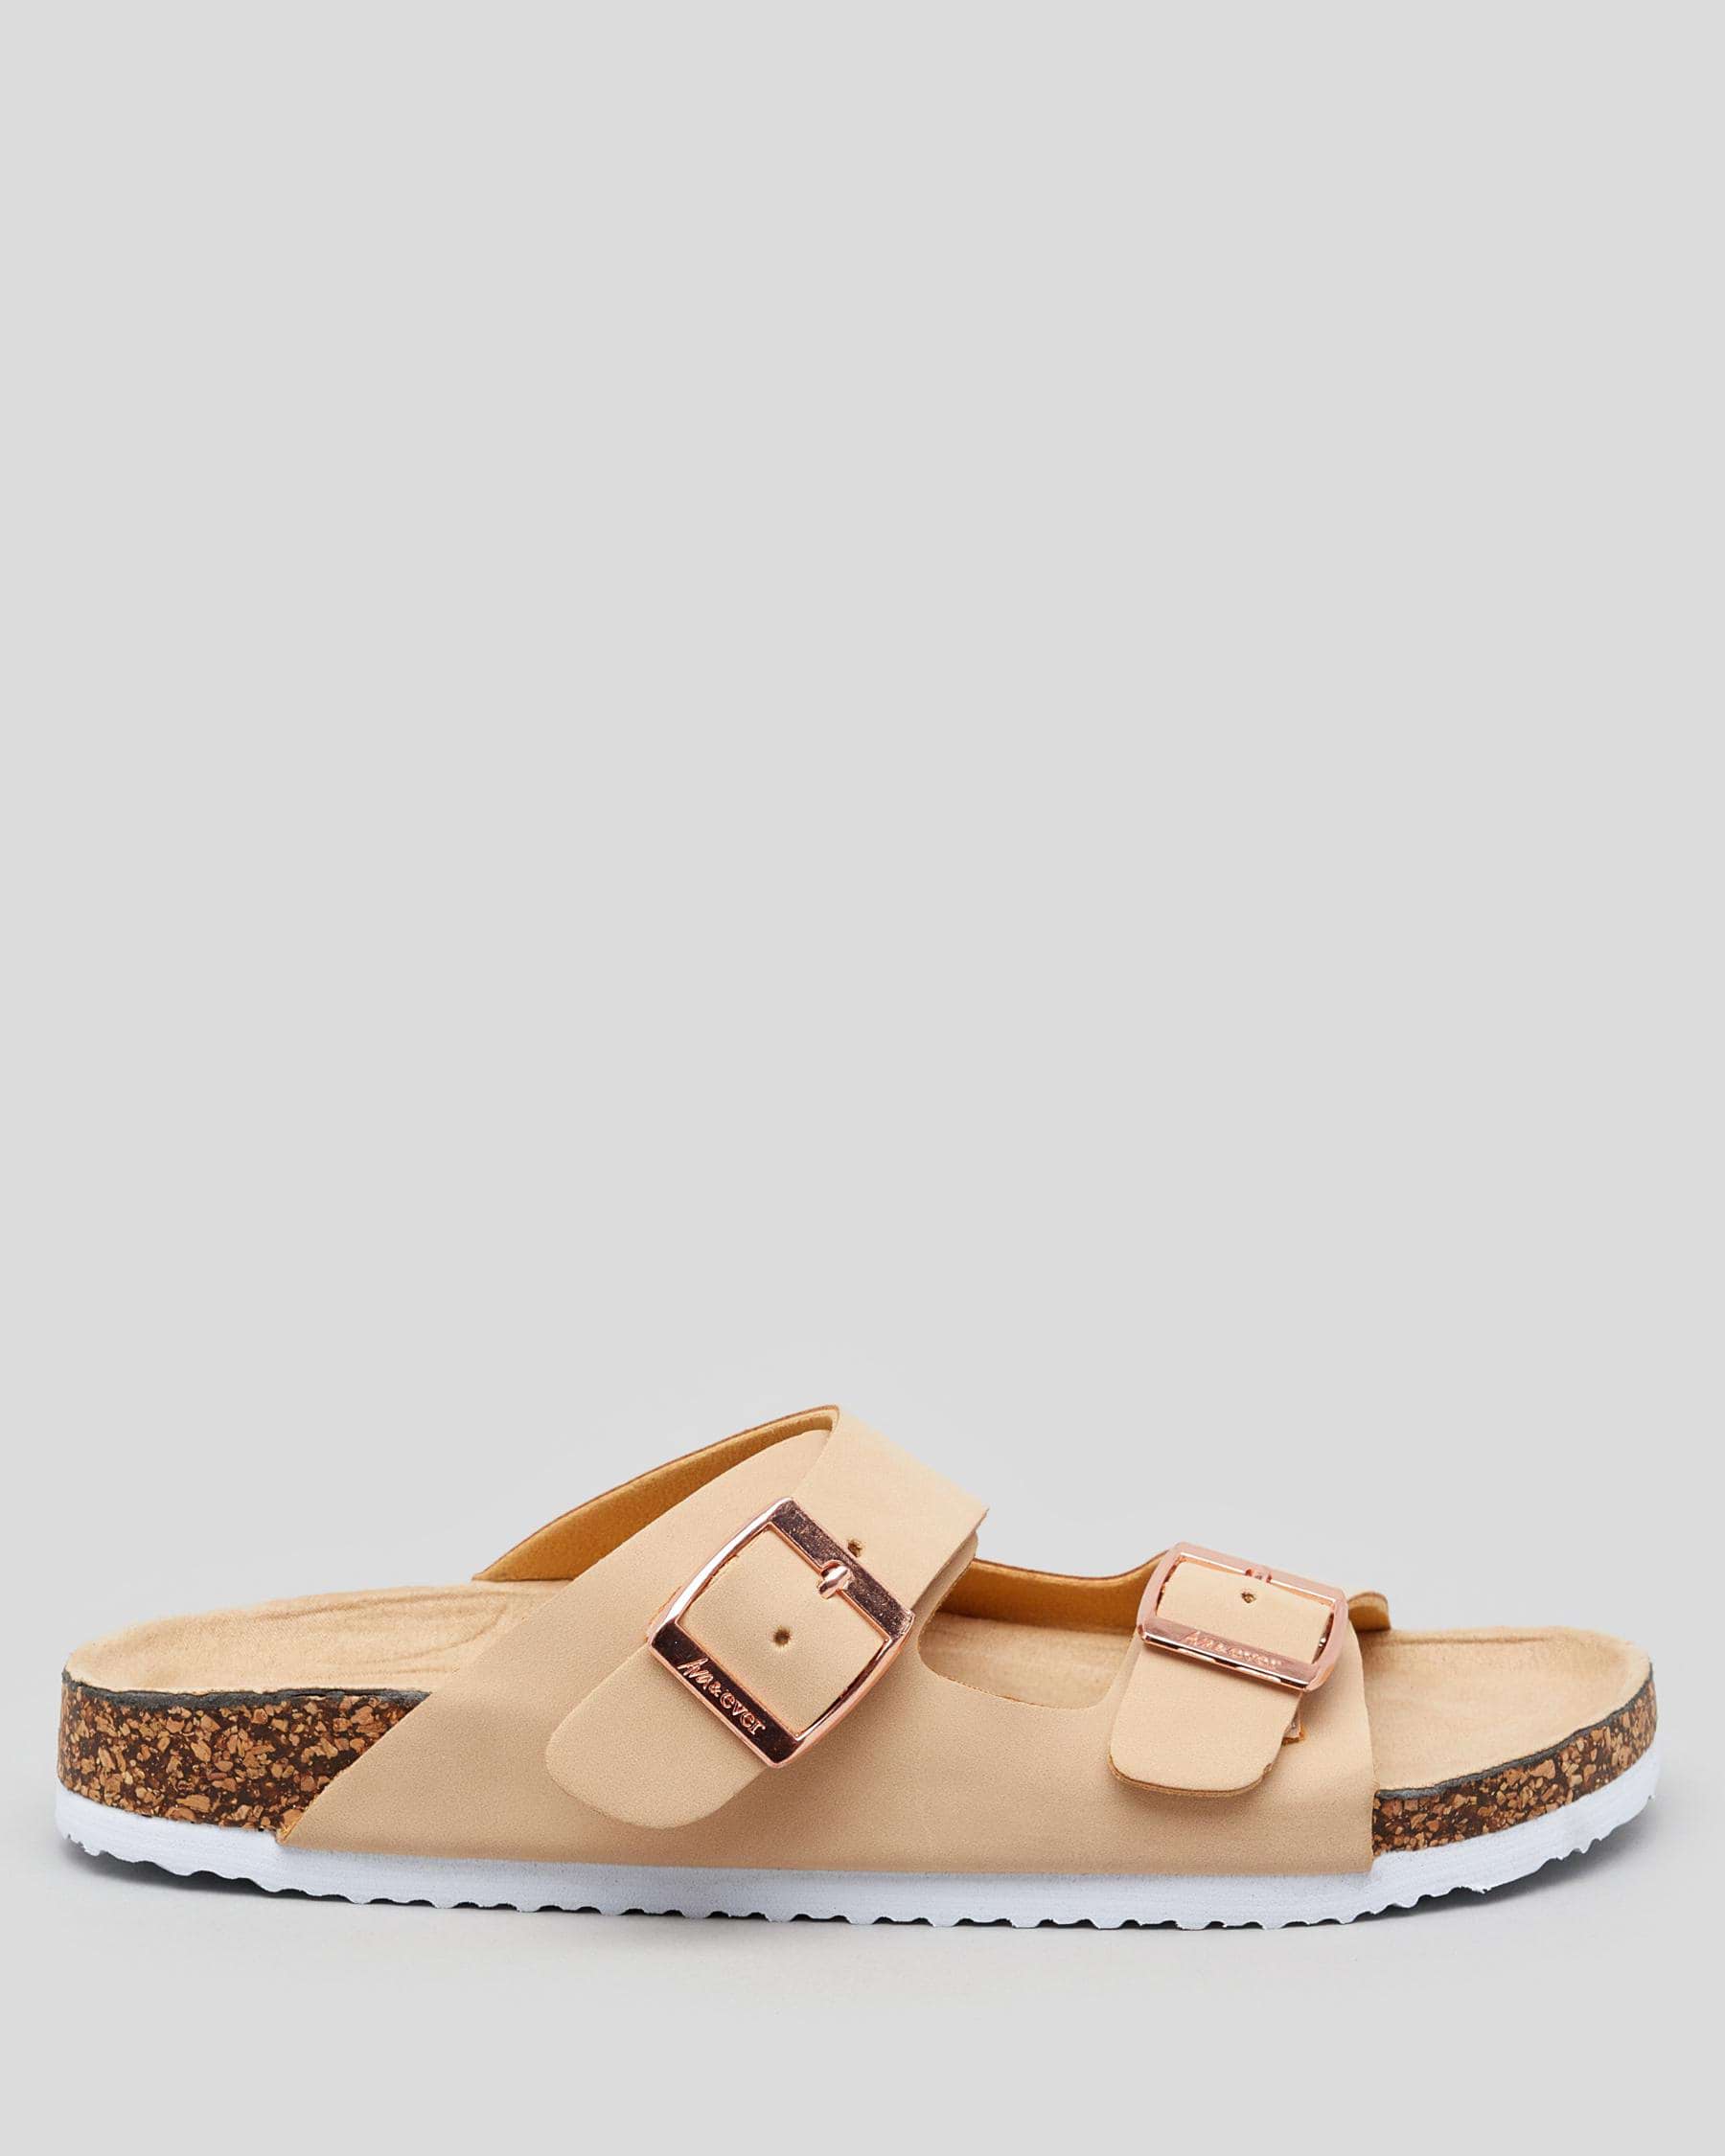 Ava And Ever Cortina Slide Sandals In Oatmeal - Fast Shipping & Easy ...